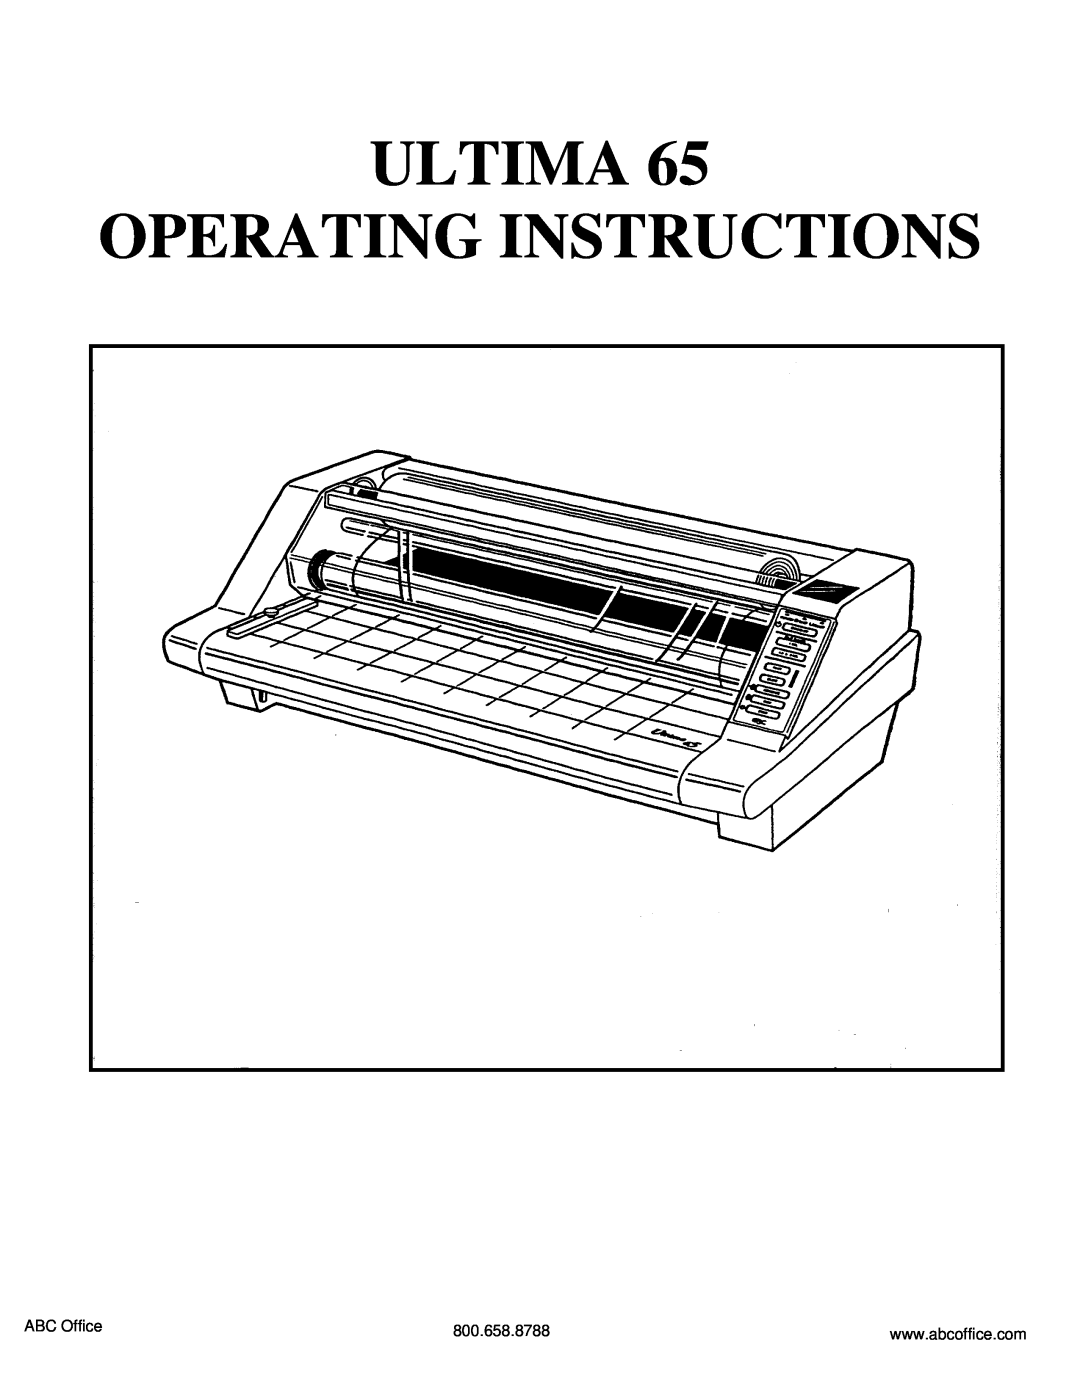 ABC Office ULTIMA 65 operating instructions ABC Office, 800.658.8788, Ultima Operating Instructions 